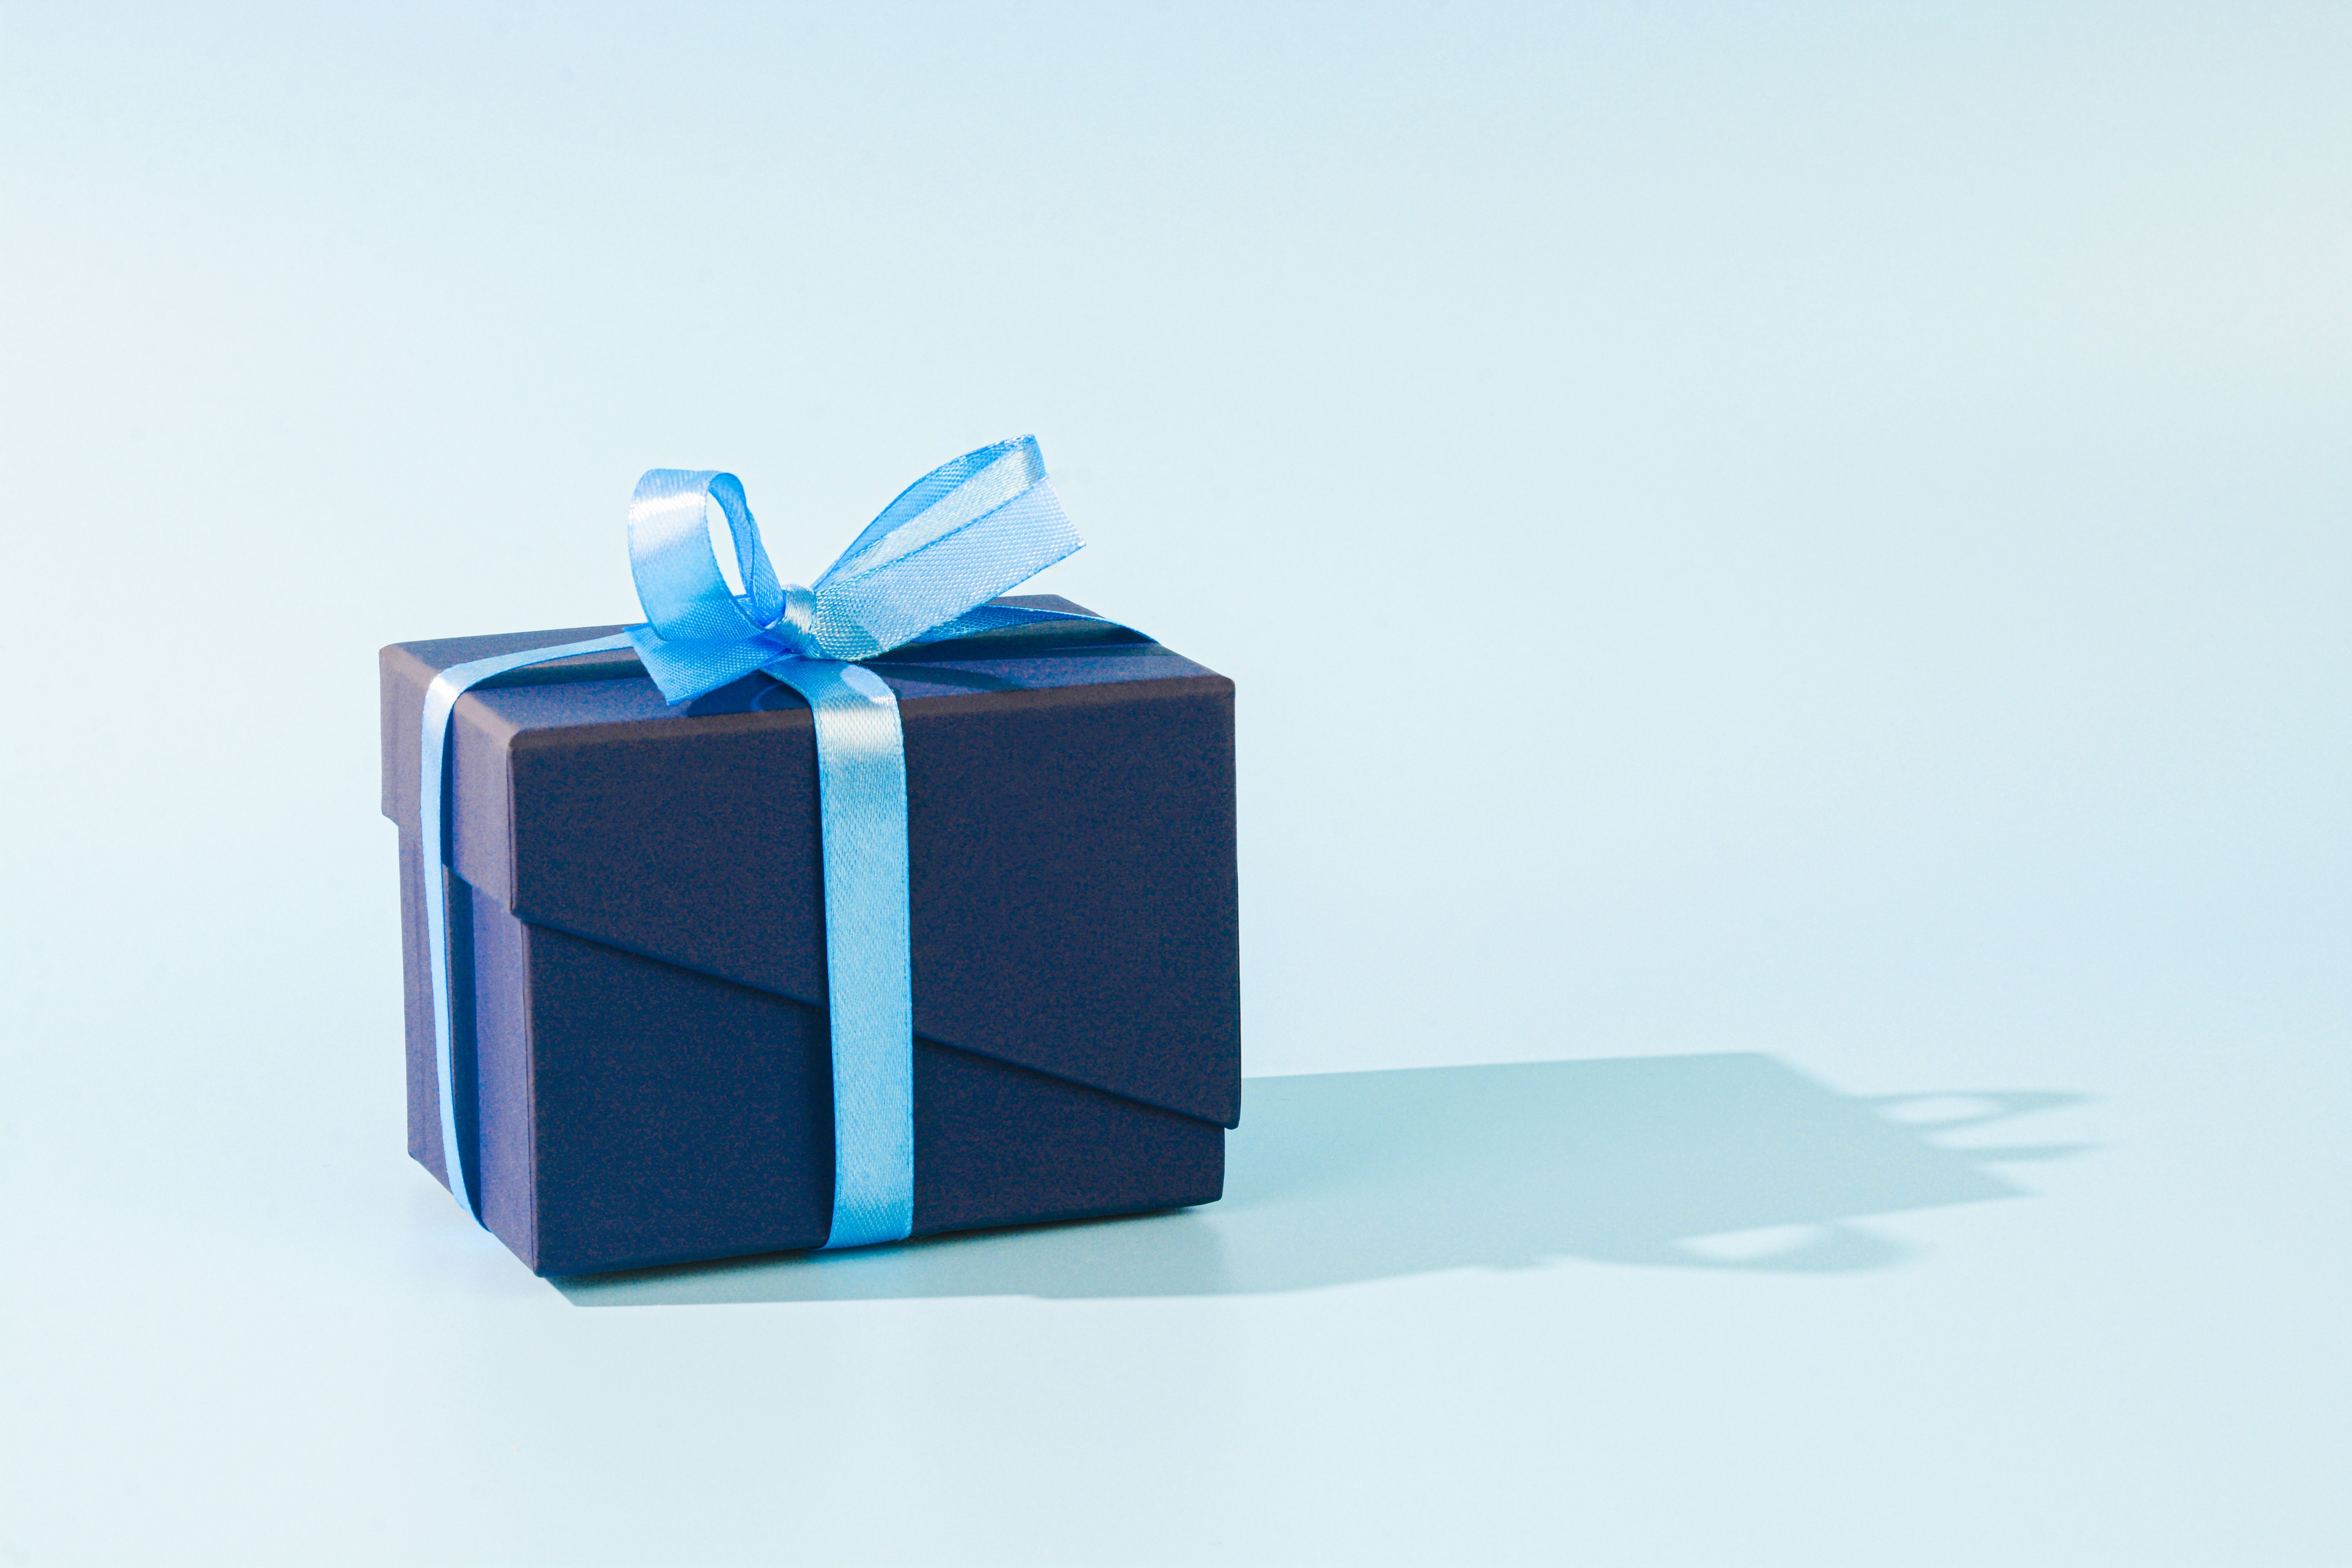 A blue gift box | Source: Getty Images